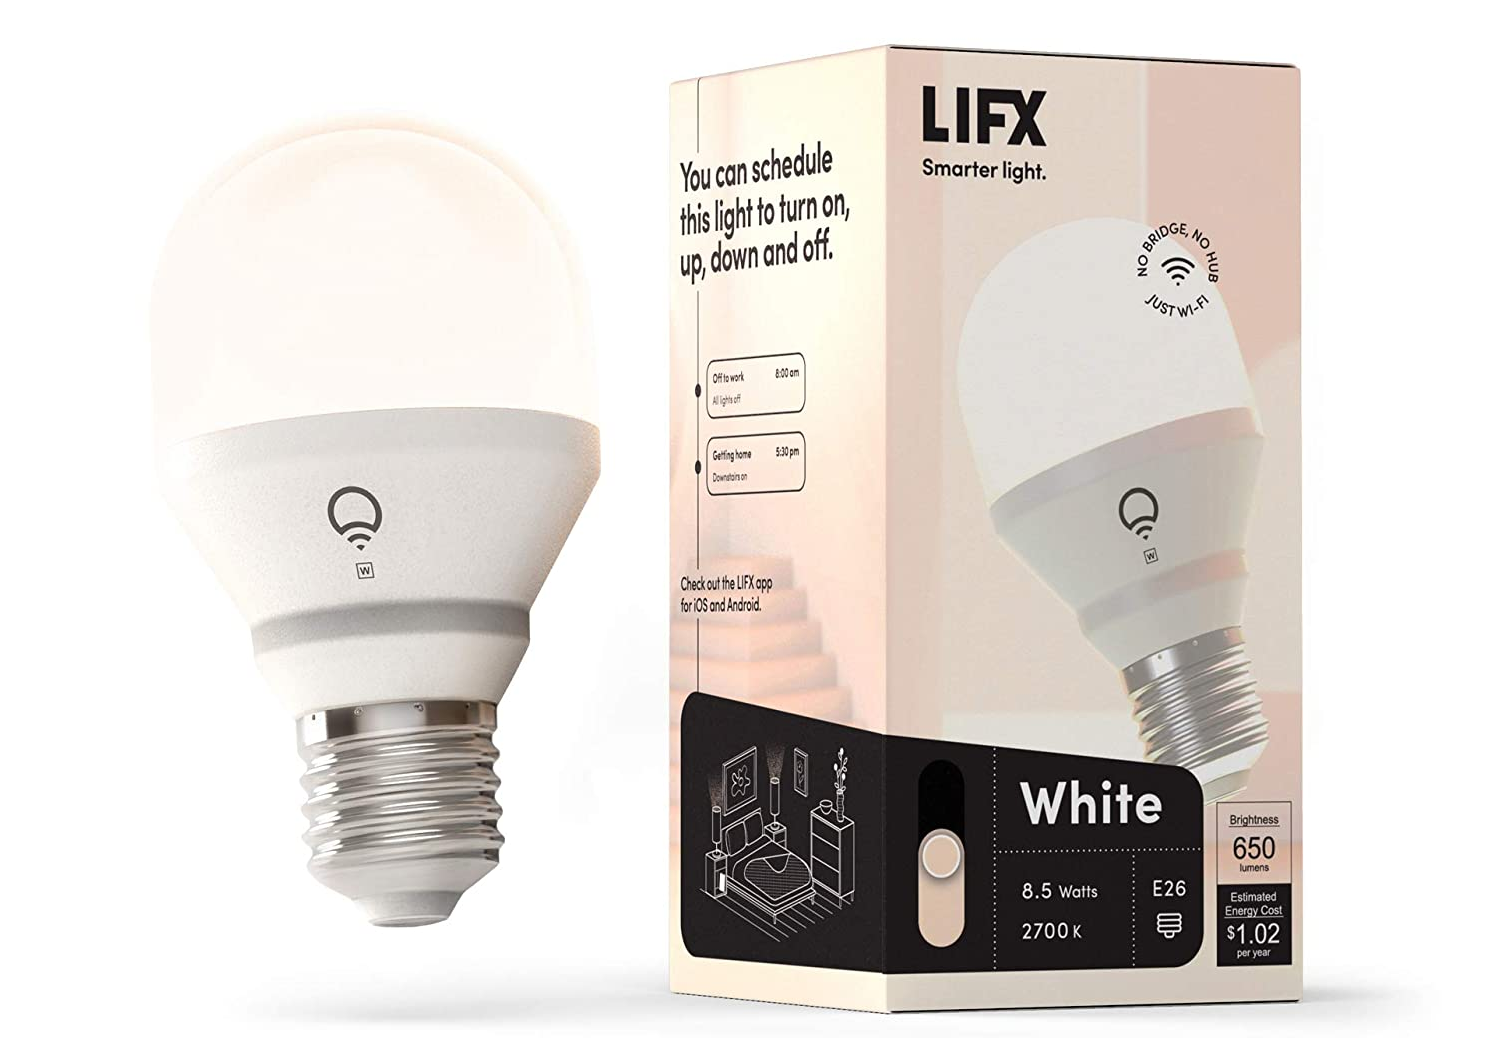 Lifx white A19 wi-fi smart bulb displayed next to the product's box